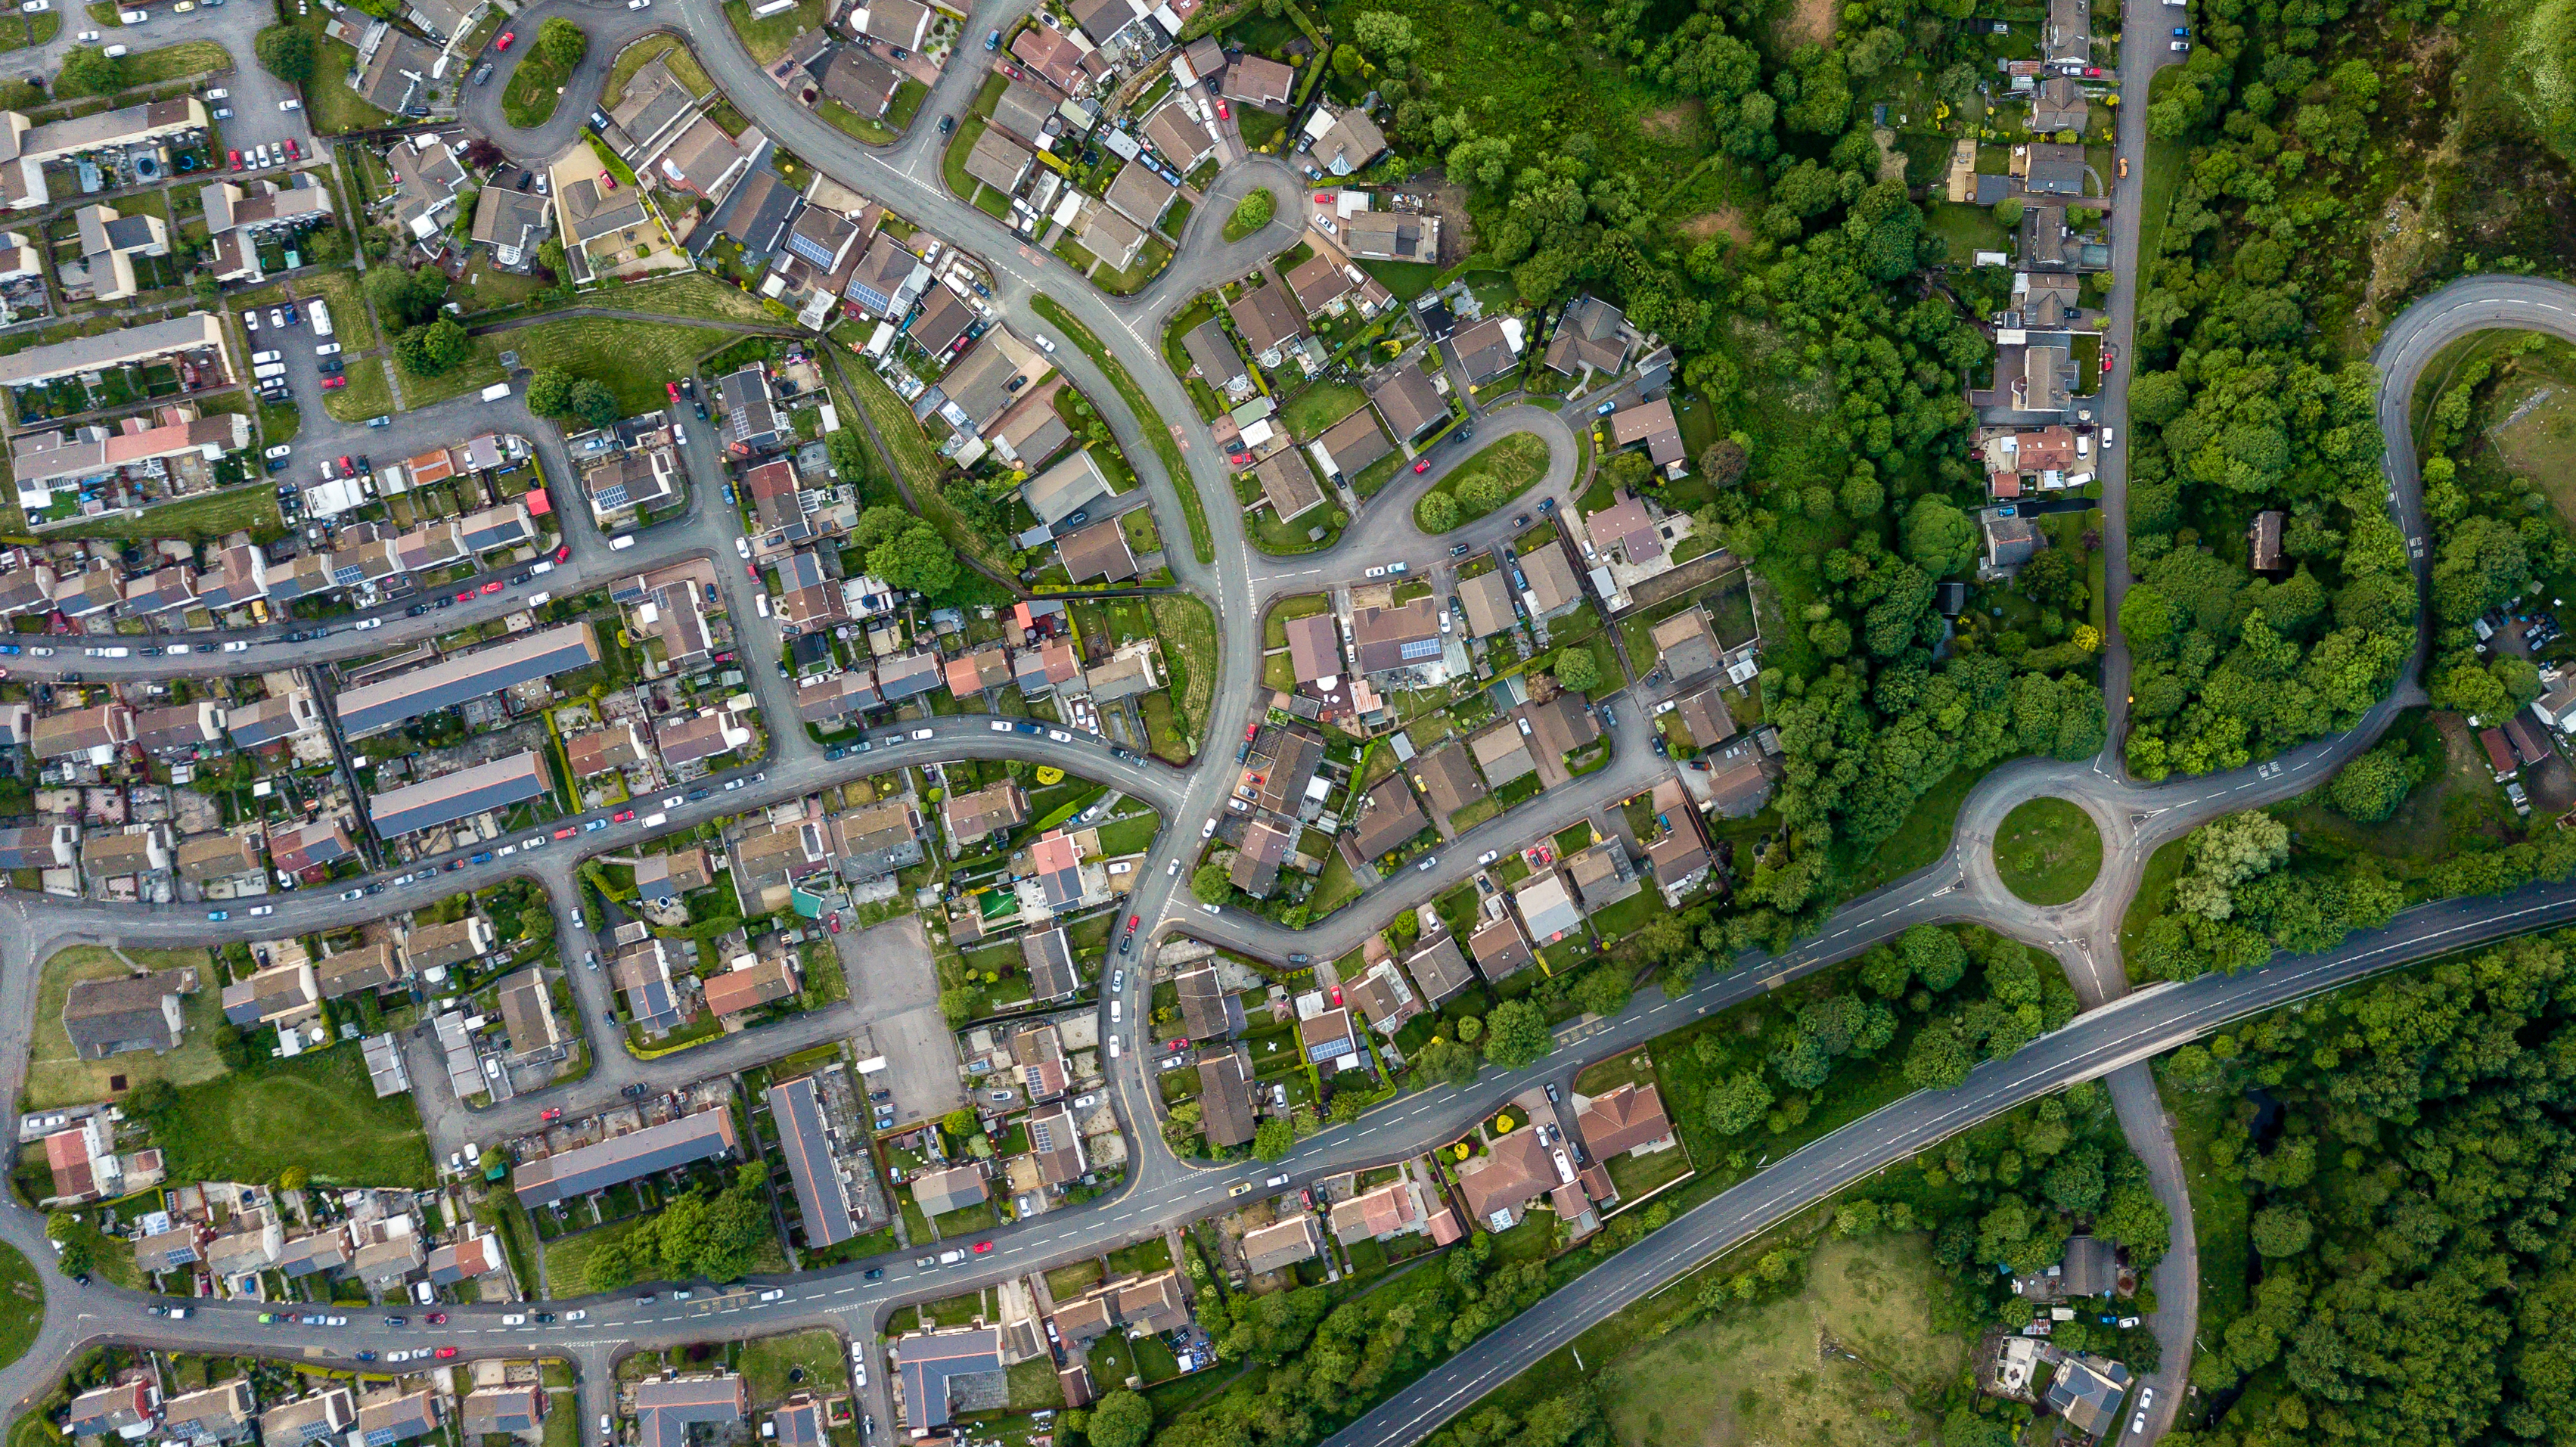 Top down aerial view of an urban area in a small town surrounded by trees and greenery; Shutterstock ID 1111441478; purchase_order: NA; job: CJ Brian Ward February 2022; client: ; other: 